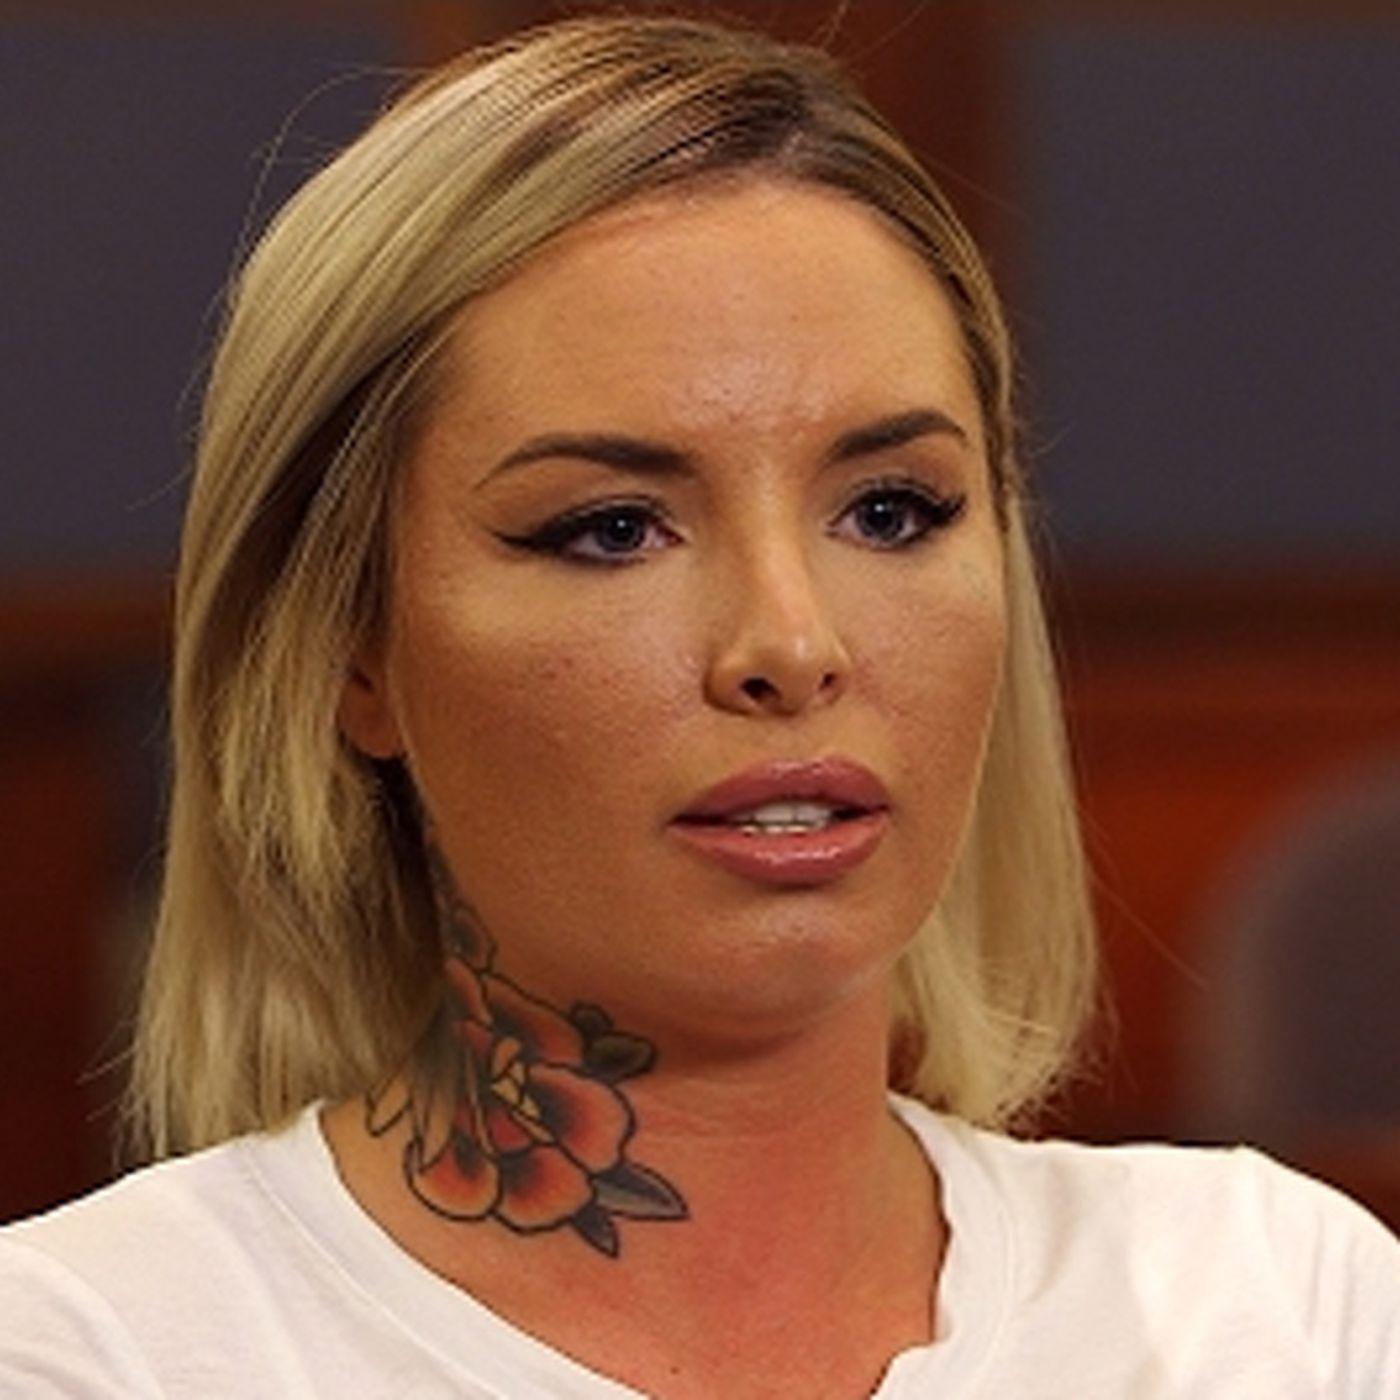 Emotional Christy Mack opens up in HBO 'Real Sports' interview after